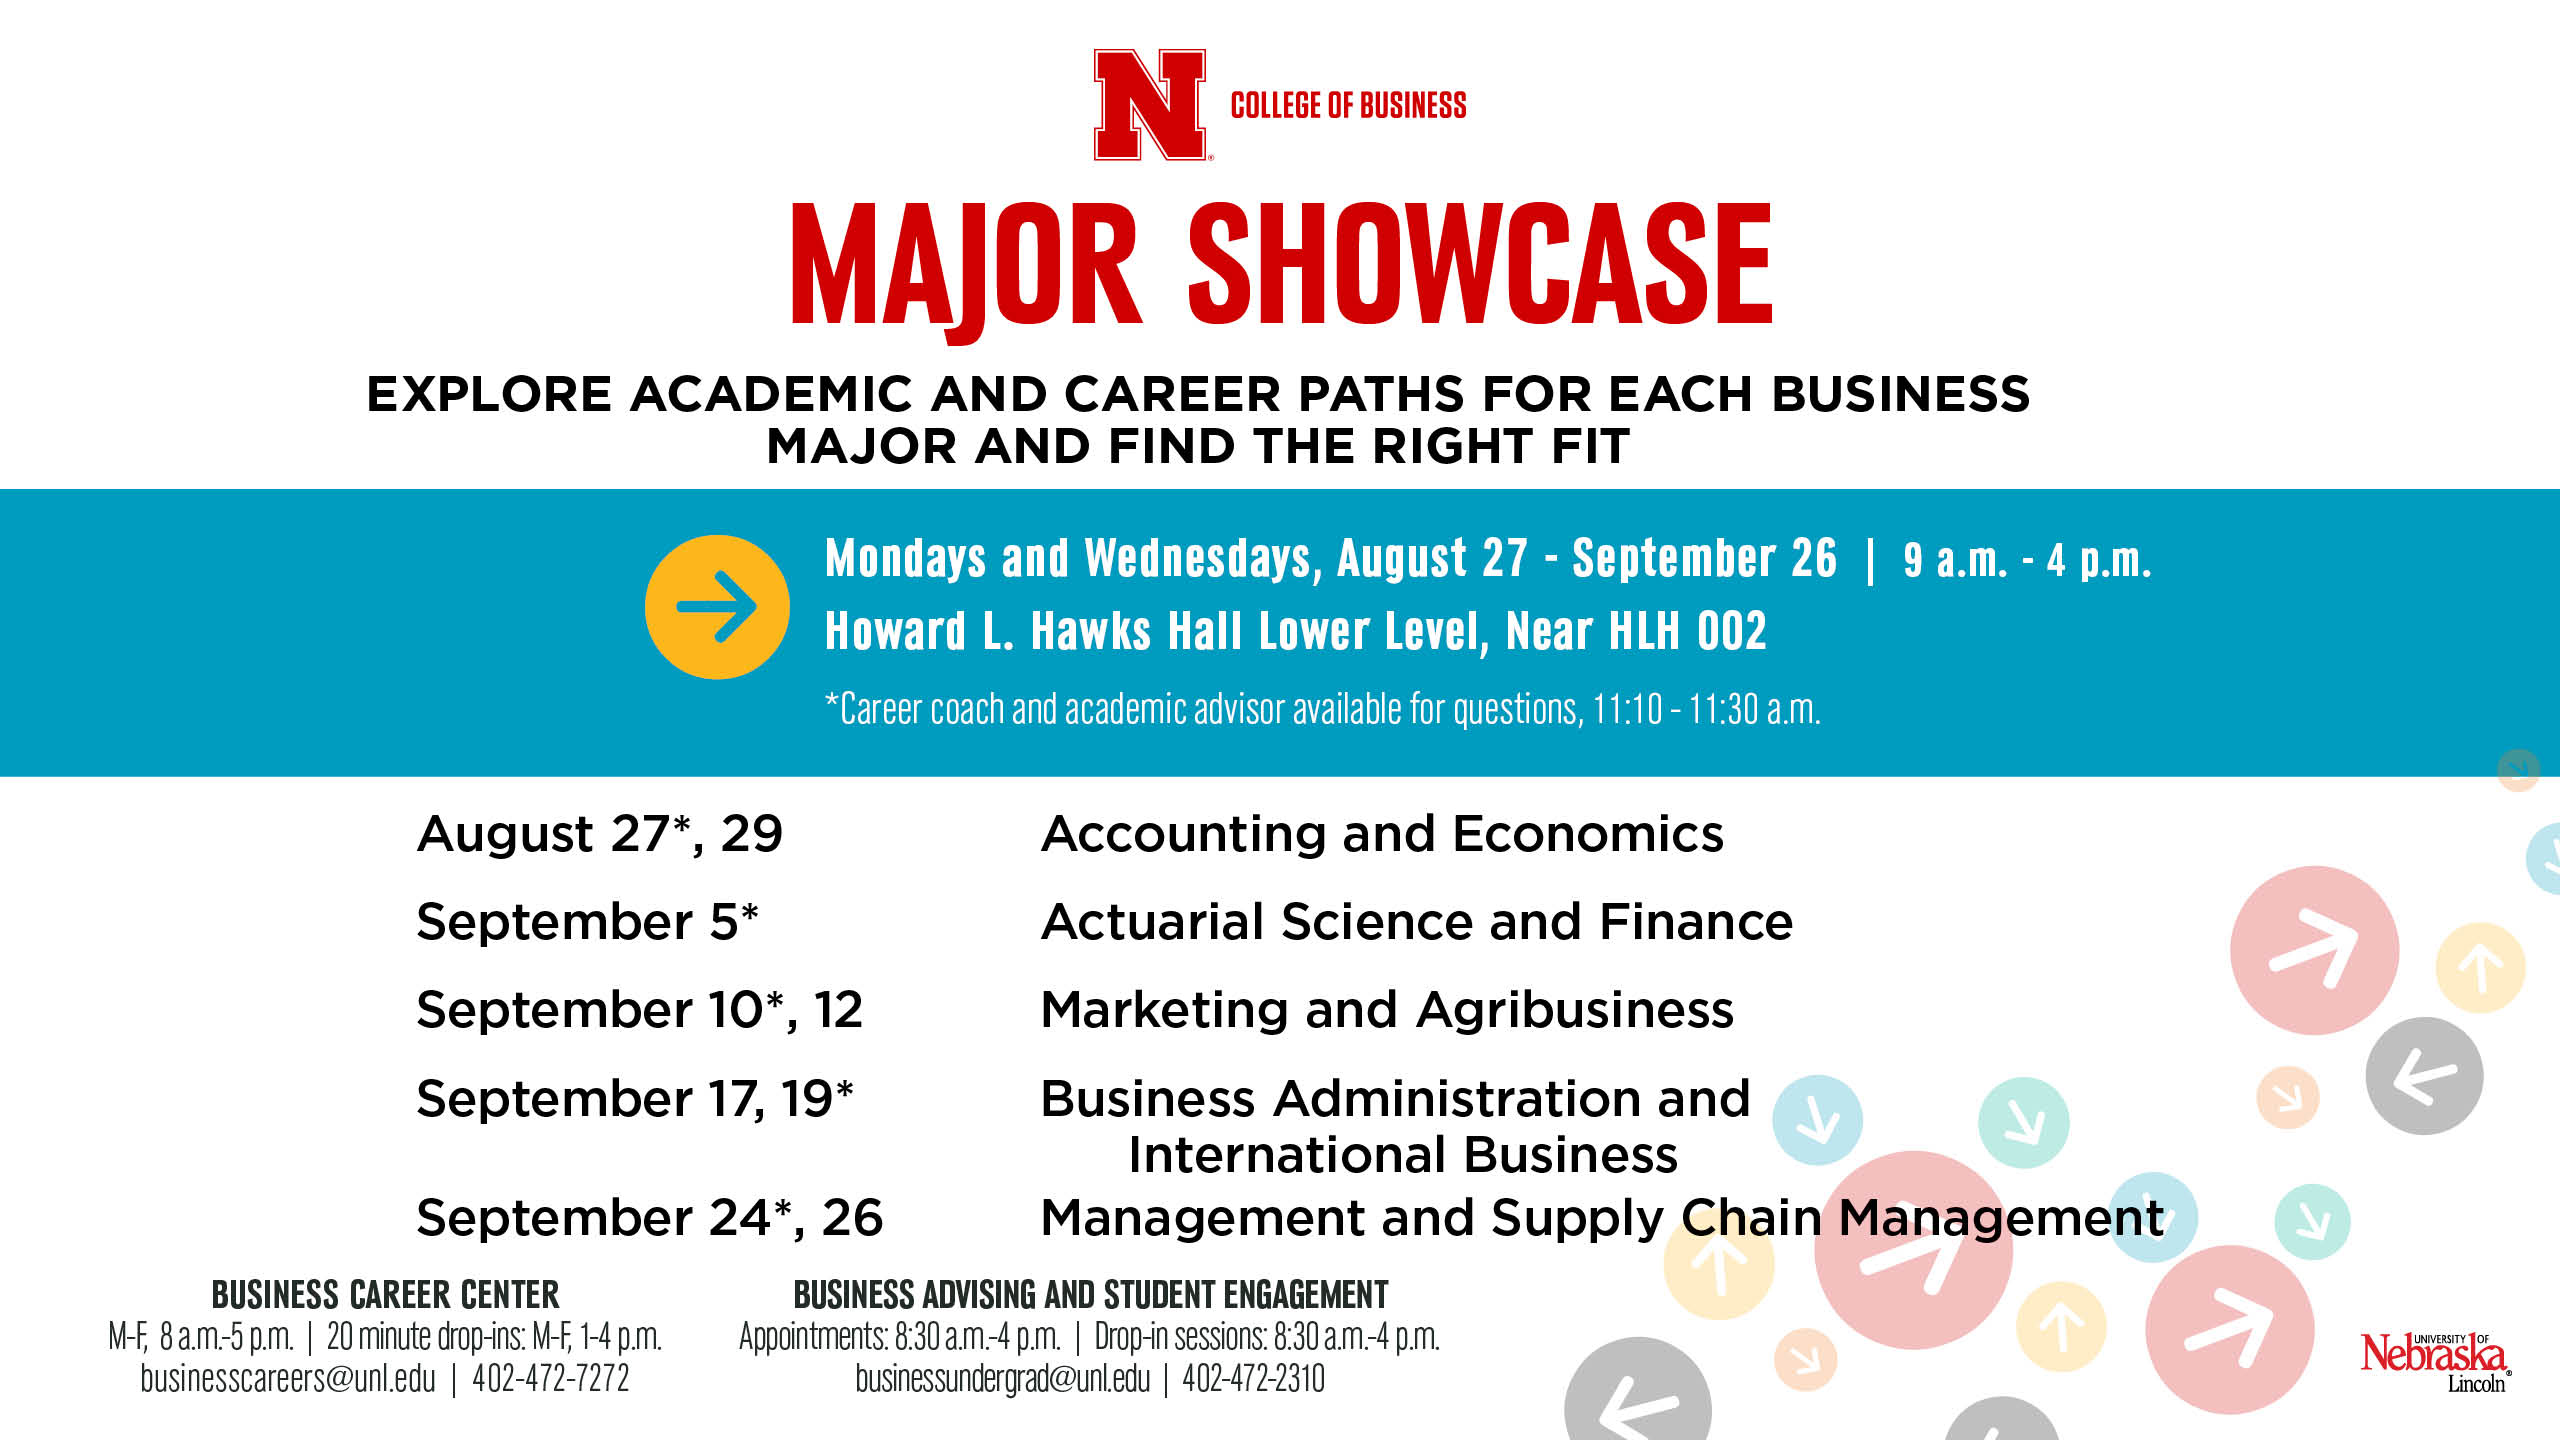 College of Business Major Showcase 